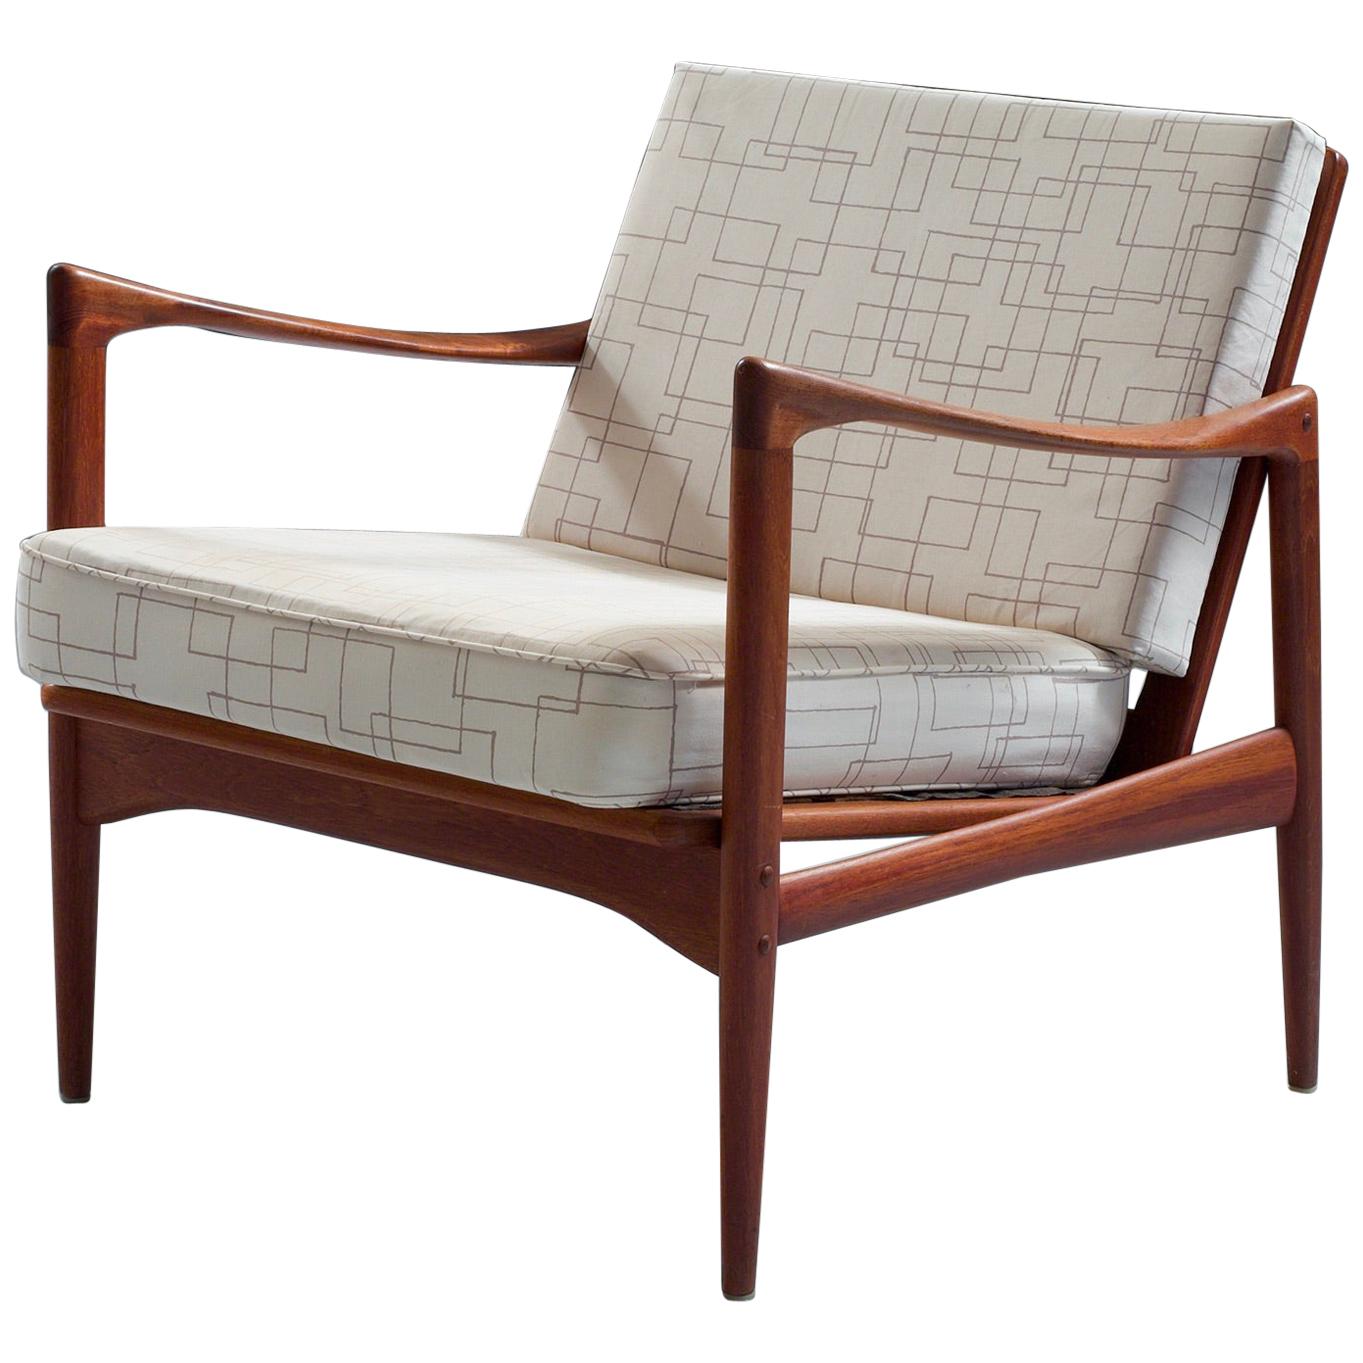 'Kandidaten' Chair by Ib Kofod-Larsen in Teak and Fabric for OPE, Sweden, 1960s